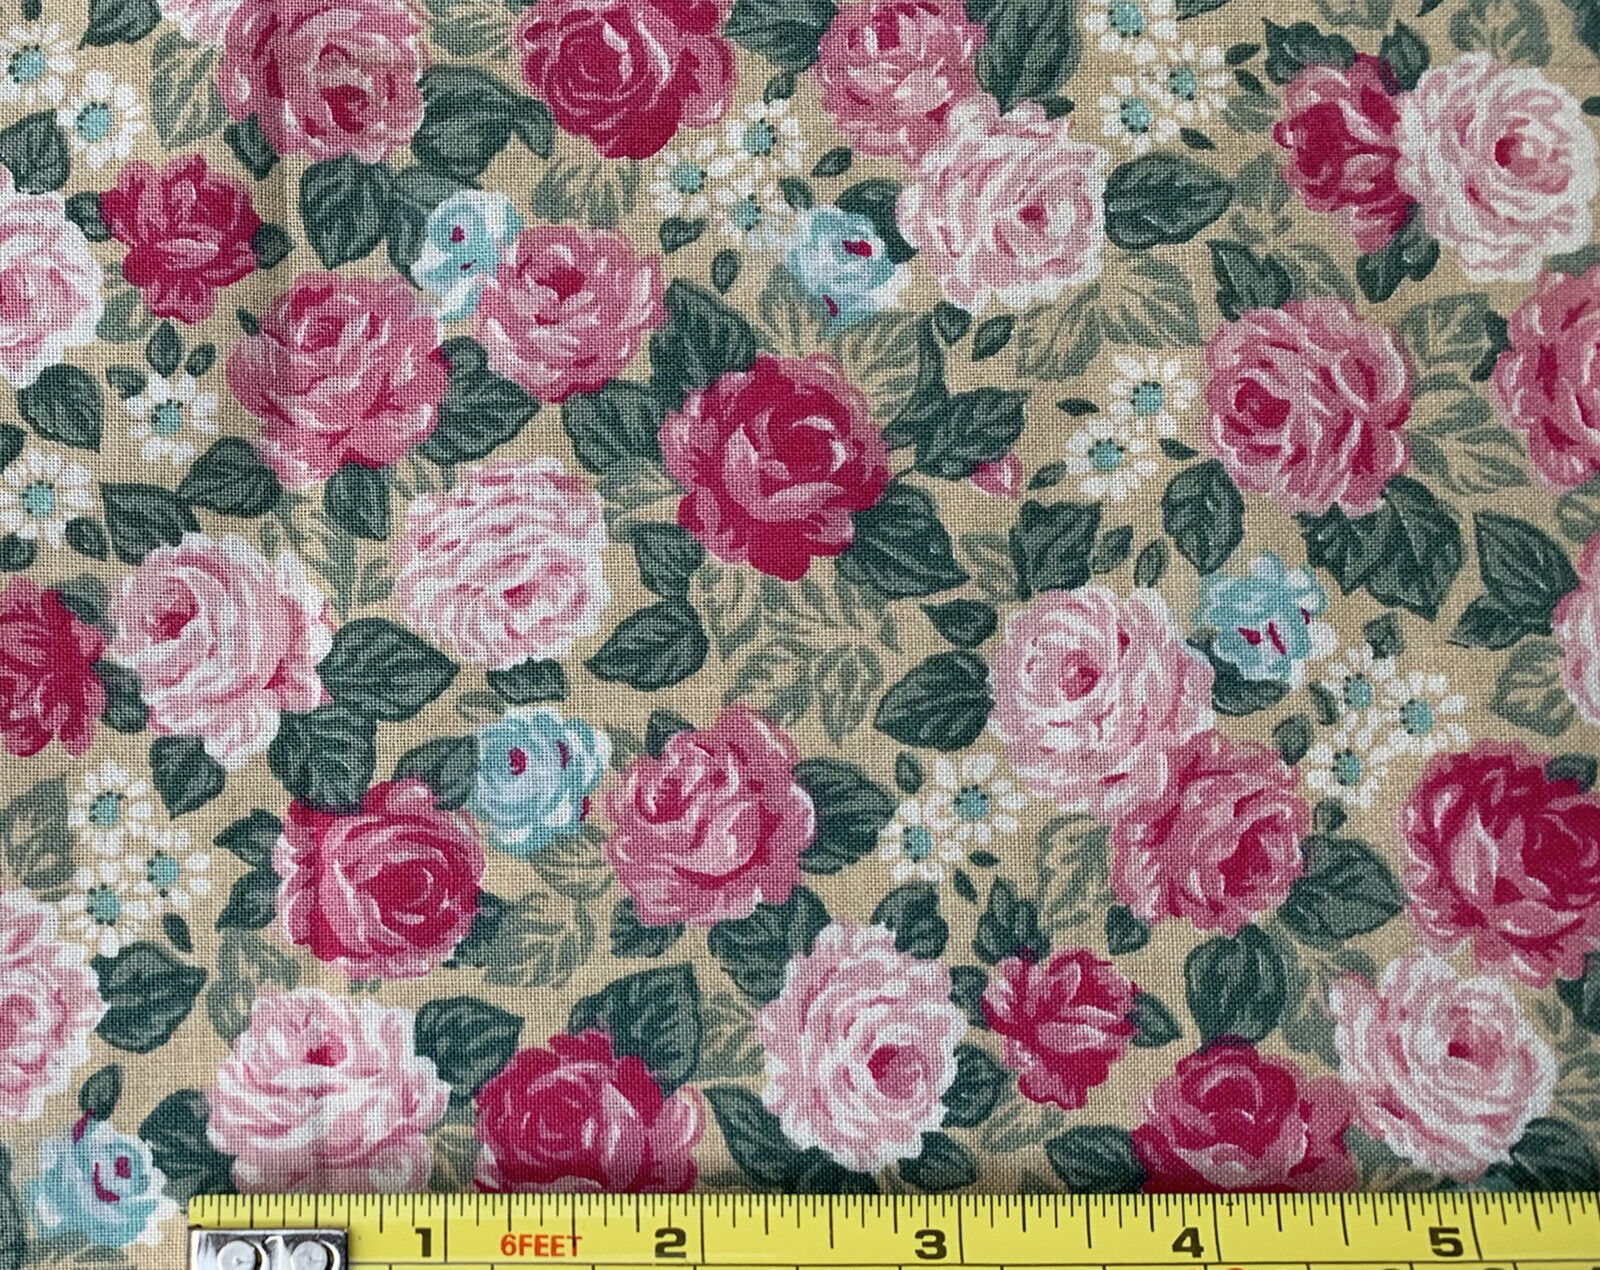 Vintage Floral Rose Roses Fabric ~ By The Yard 36” x 44-3/8”